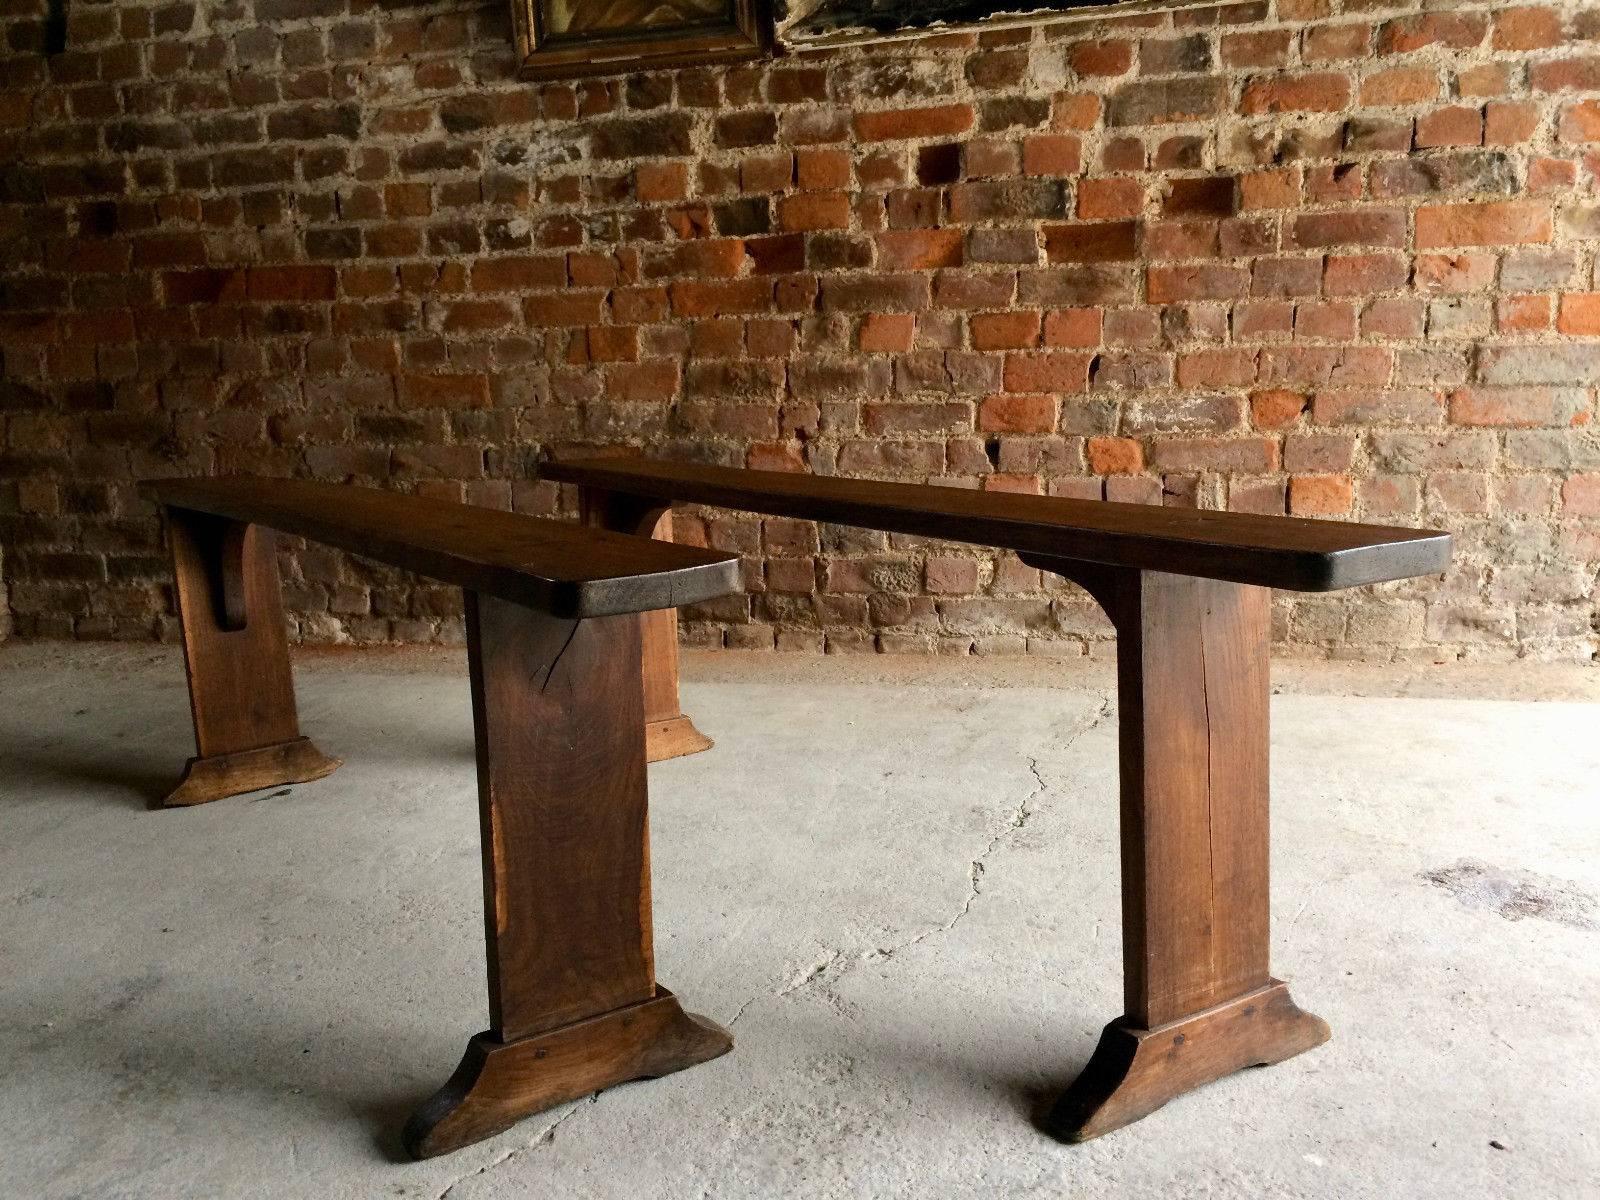 A truly magnificent Victorian pair of French school bench seats, circa 1870 wonderful aged patina and offered in good antique condition, slight wear to legs in line with age and use, look amazing.